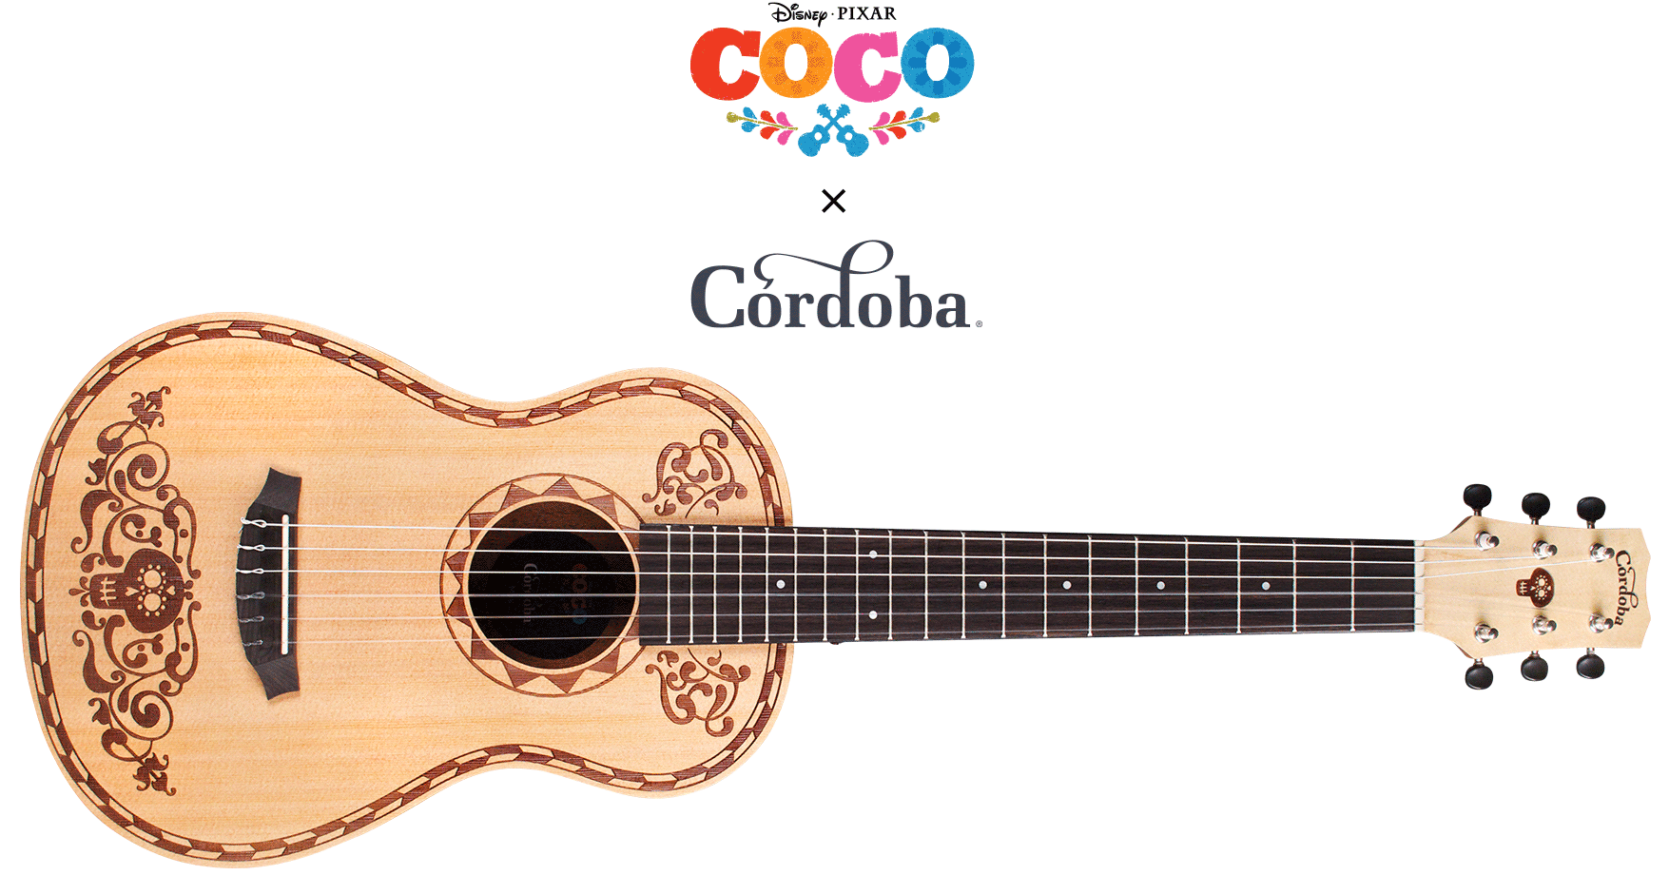 Coco guitar clipart PNG image image